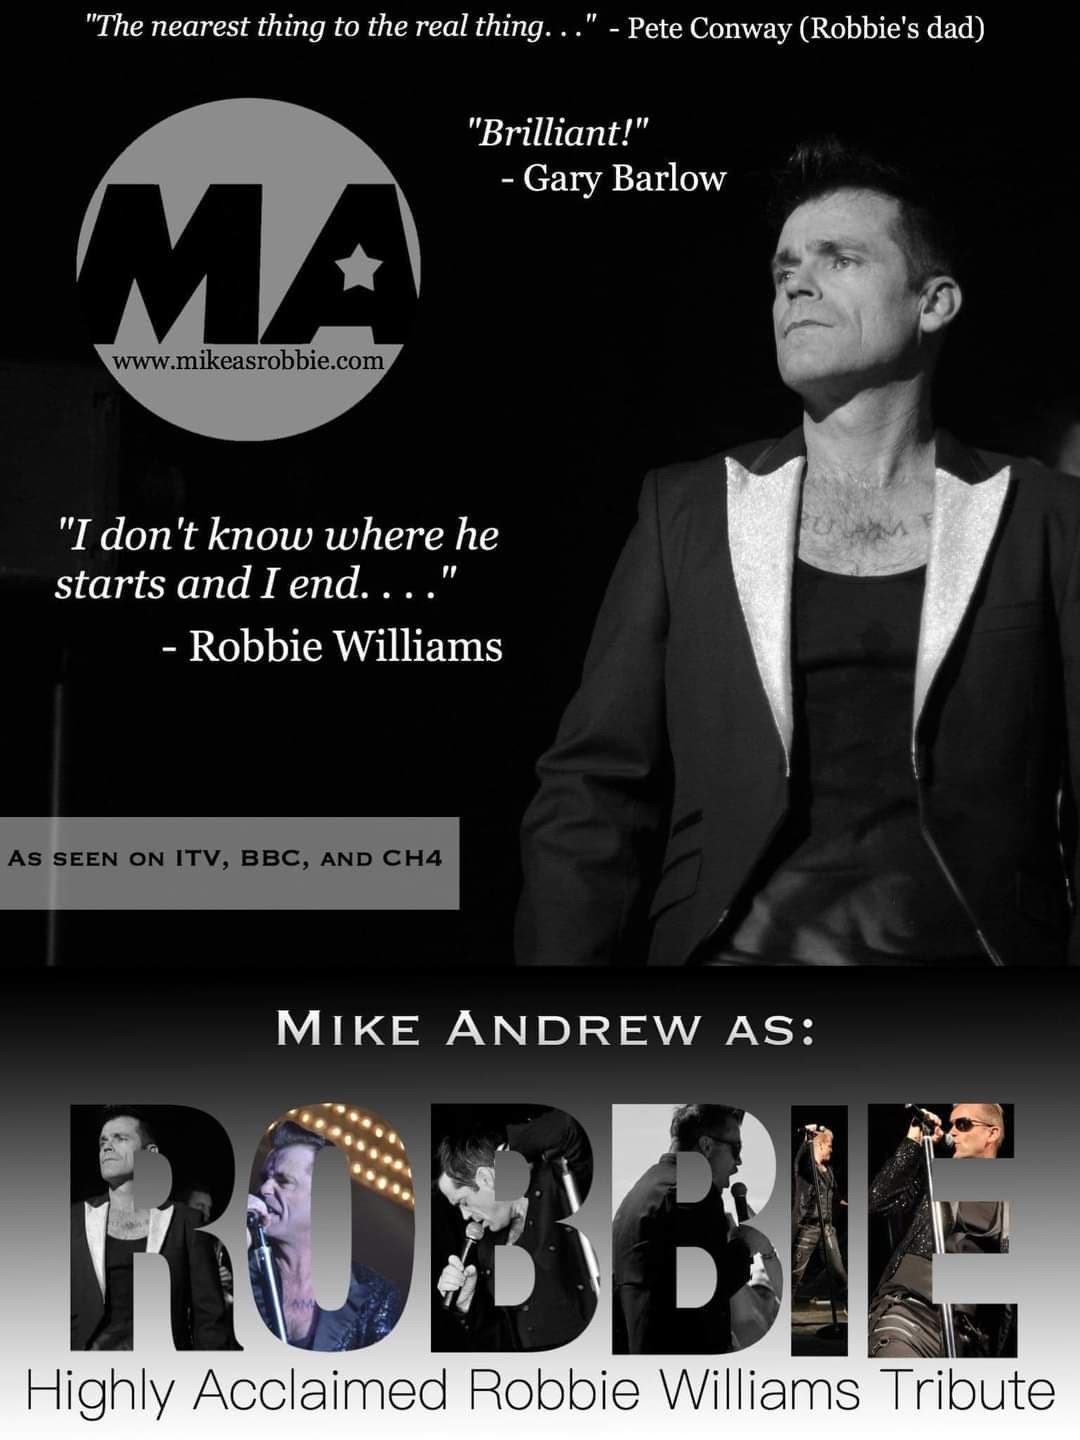 ROBBIE WILLIAMS TRIBUTE NIGHT  on nov. 05, 19:30@Falcon hotel - Buy tickets and Get information on whittlesey music nights 